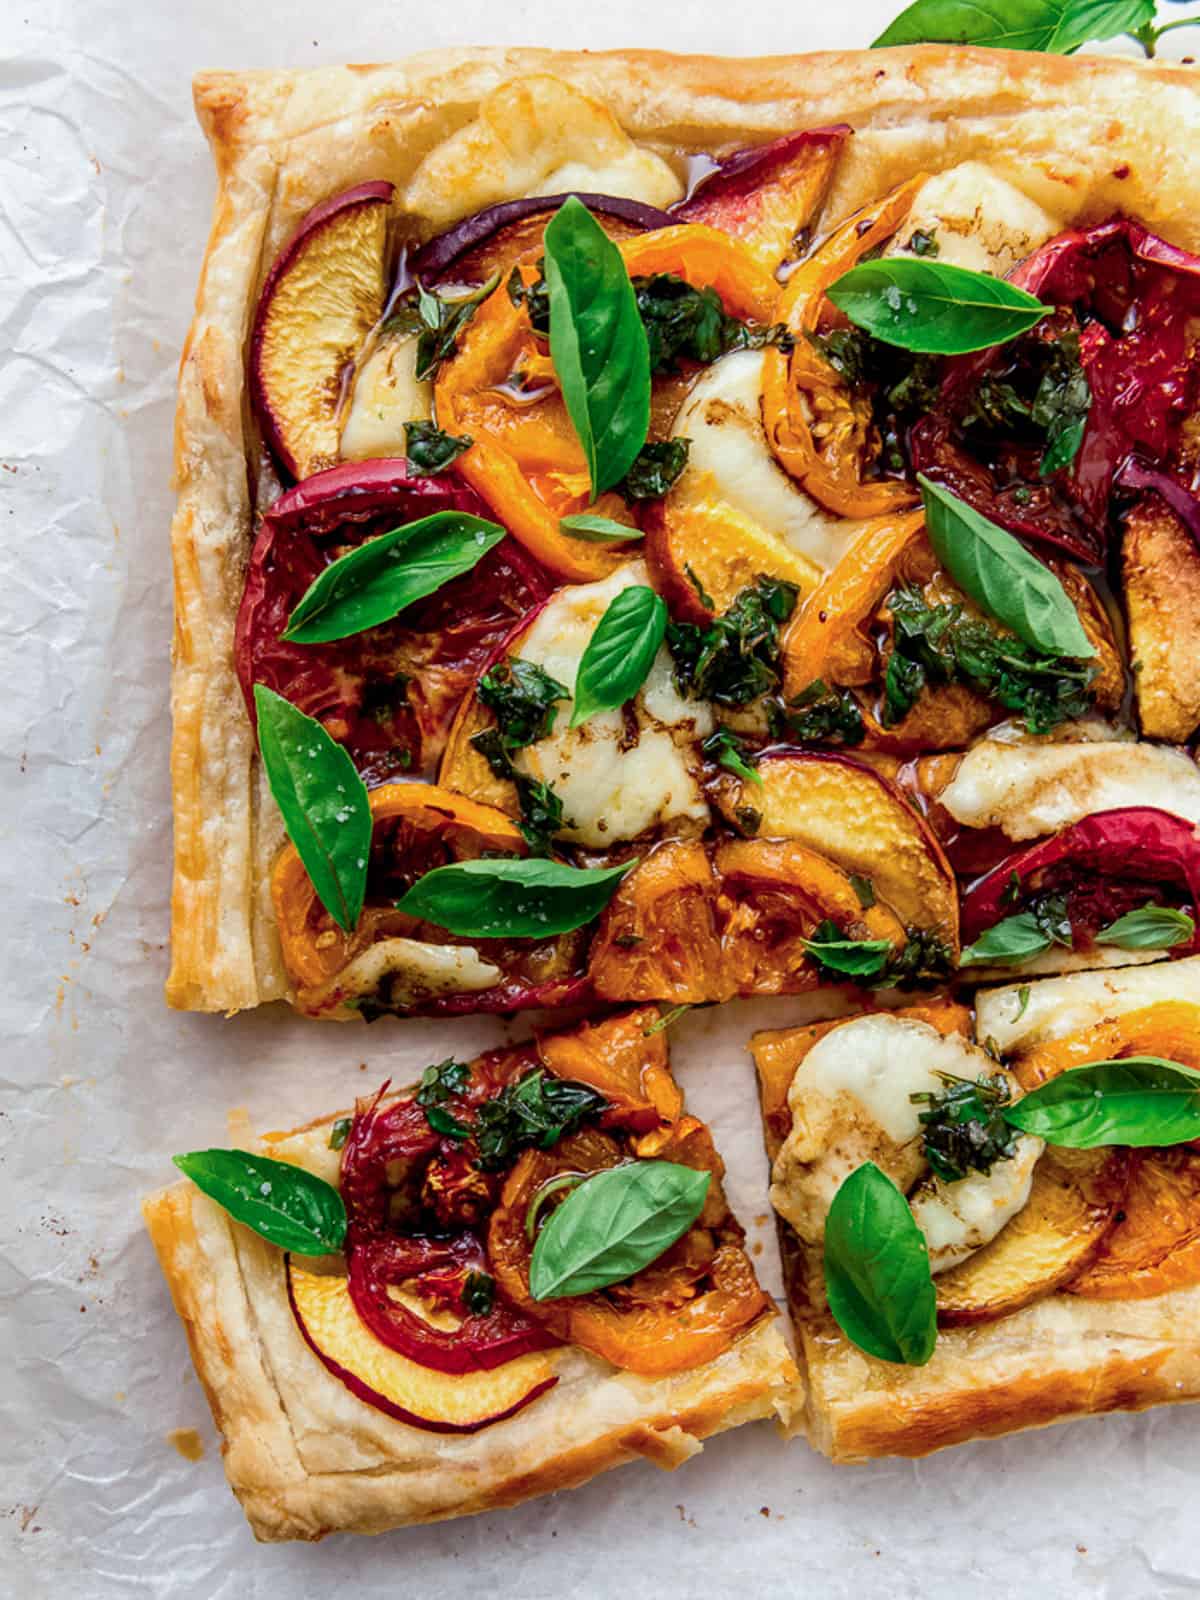 Peach caprese tart with puff pastry and garnished with basil oil and fresh basil leaves.